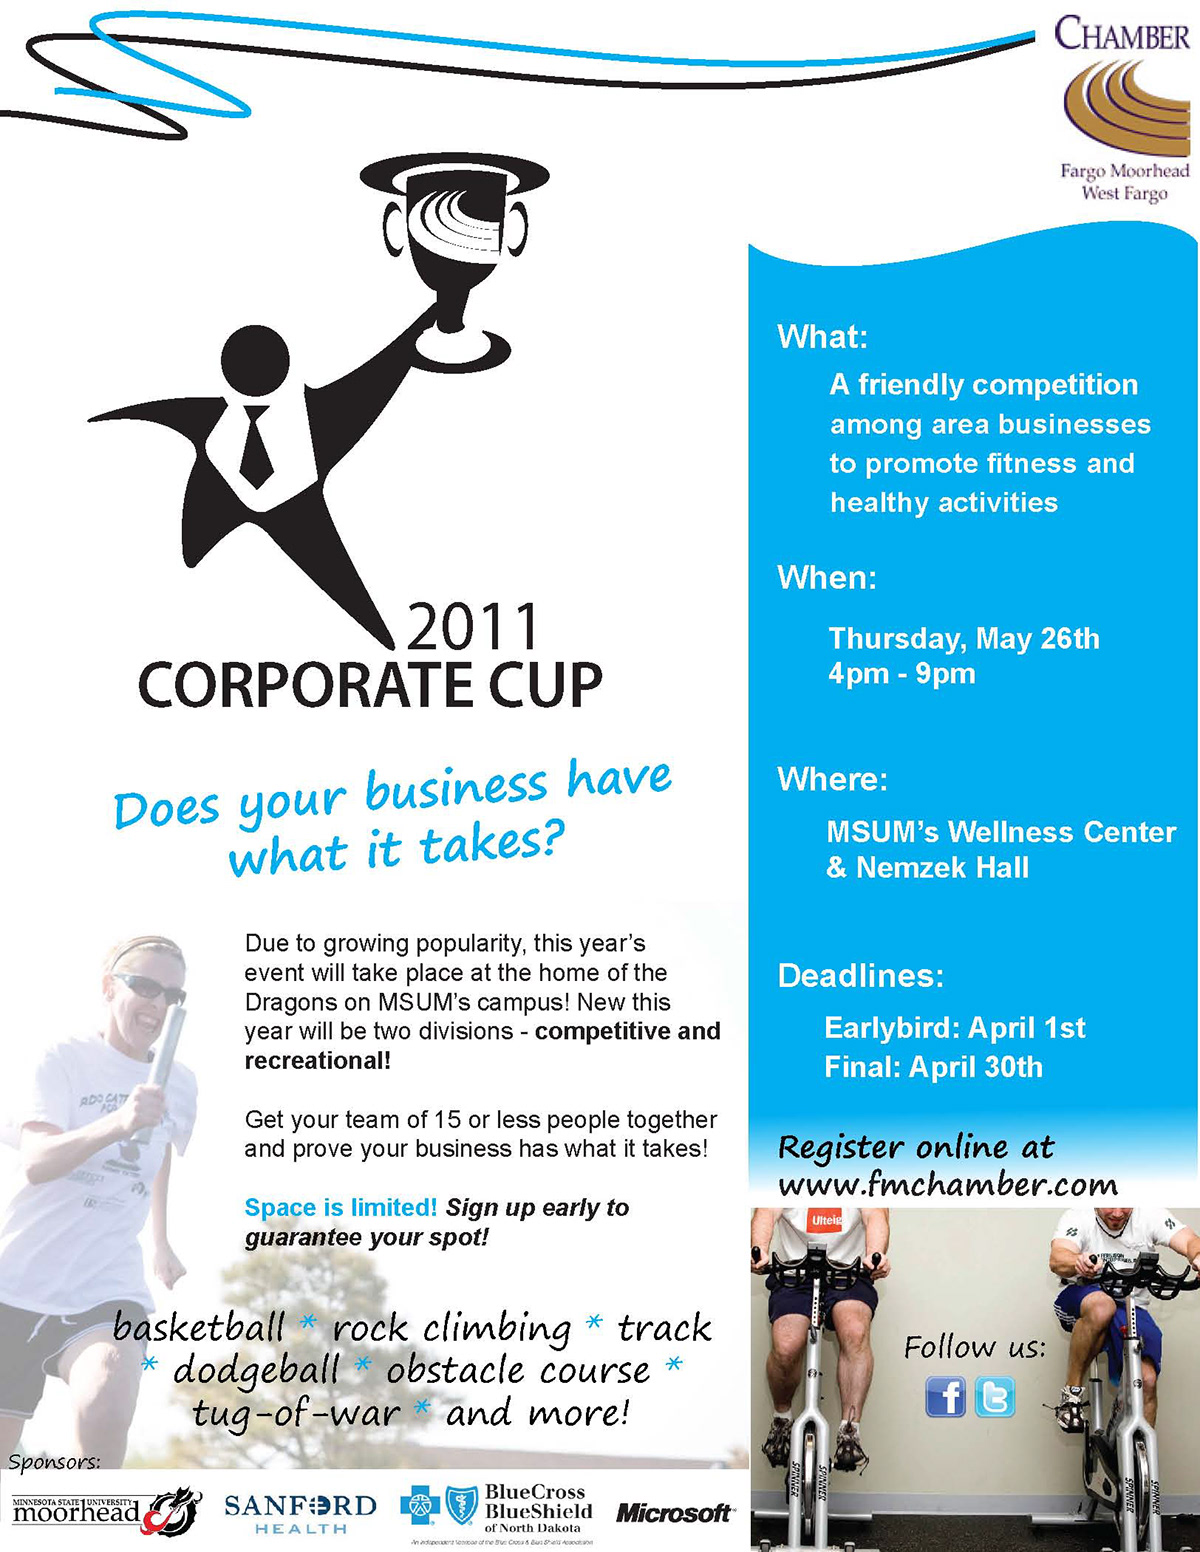 Corporate Cup Fliers the chamber campaigns